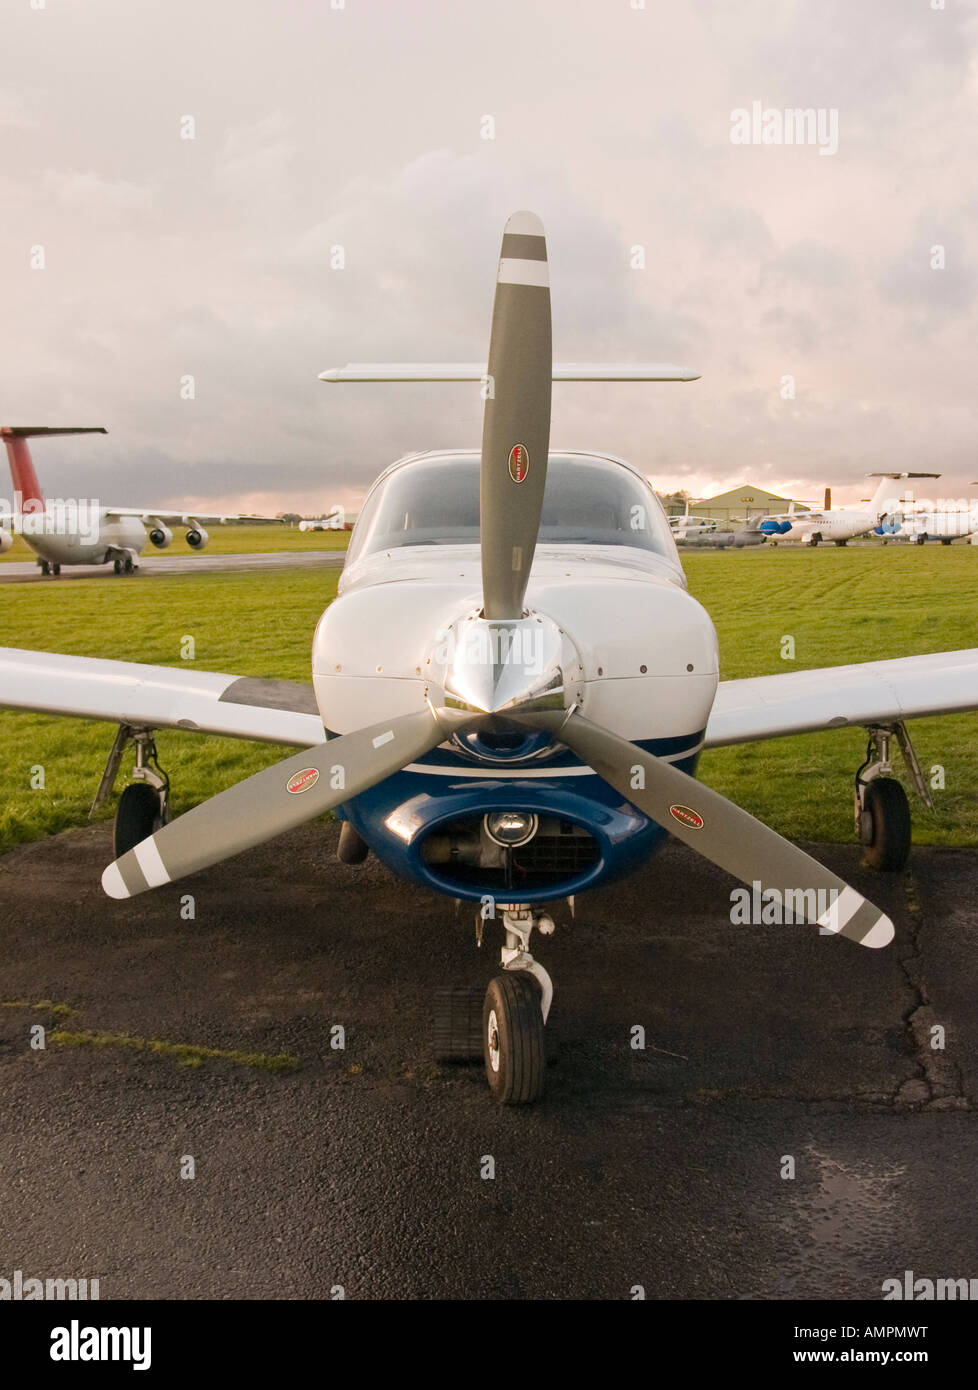 Piper PA32 single engine three bladed propeller light aircraft parked at Kemble airfield Gloucestershire England UK EU Stock Photo